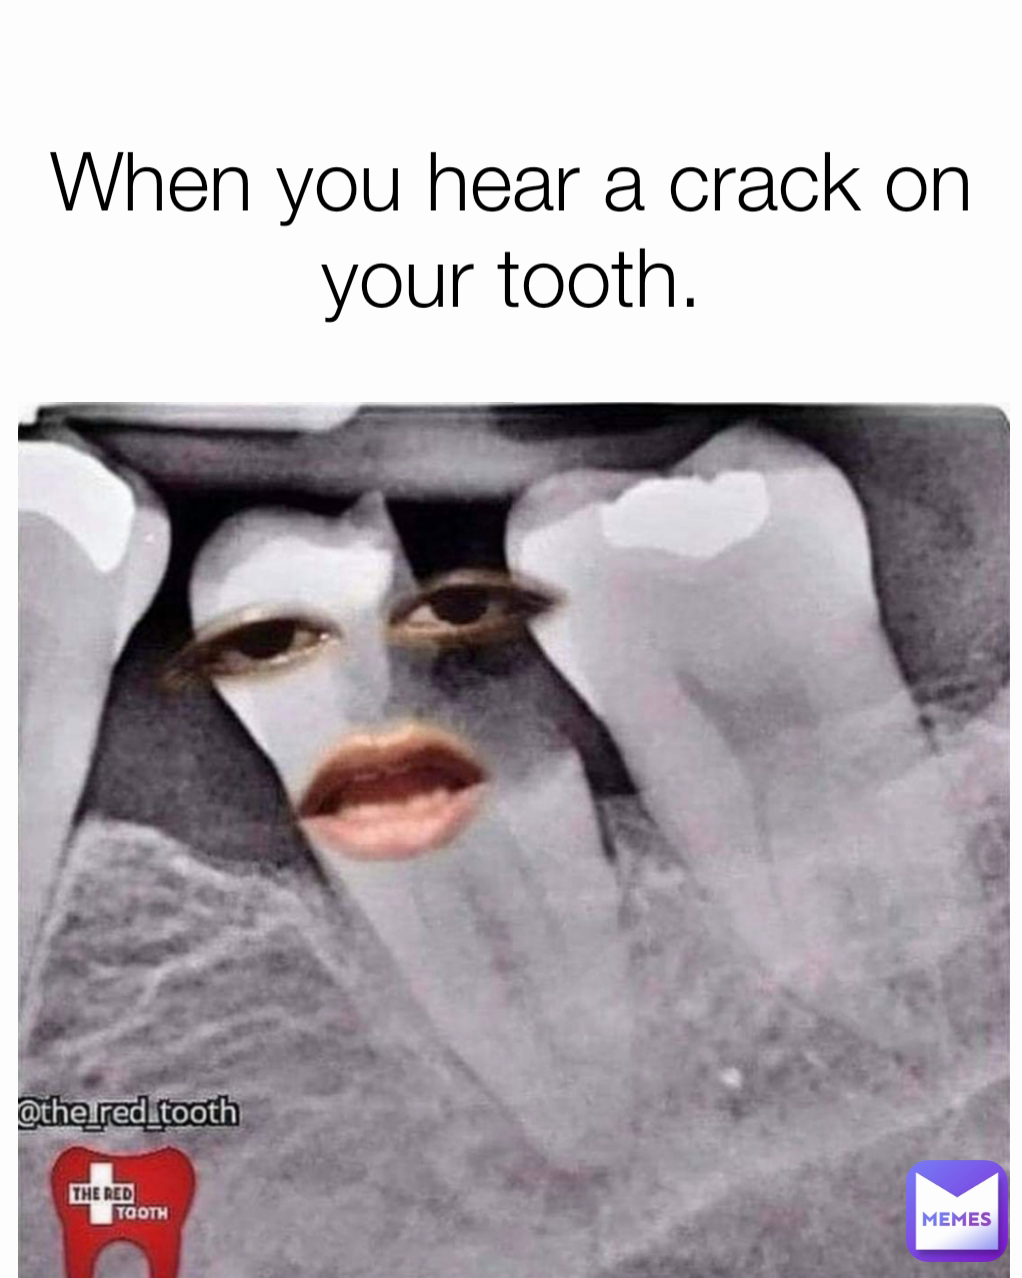 When you hear a crack on your tooth.